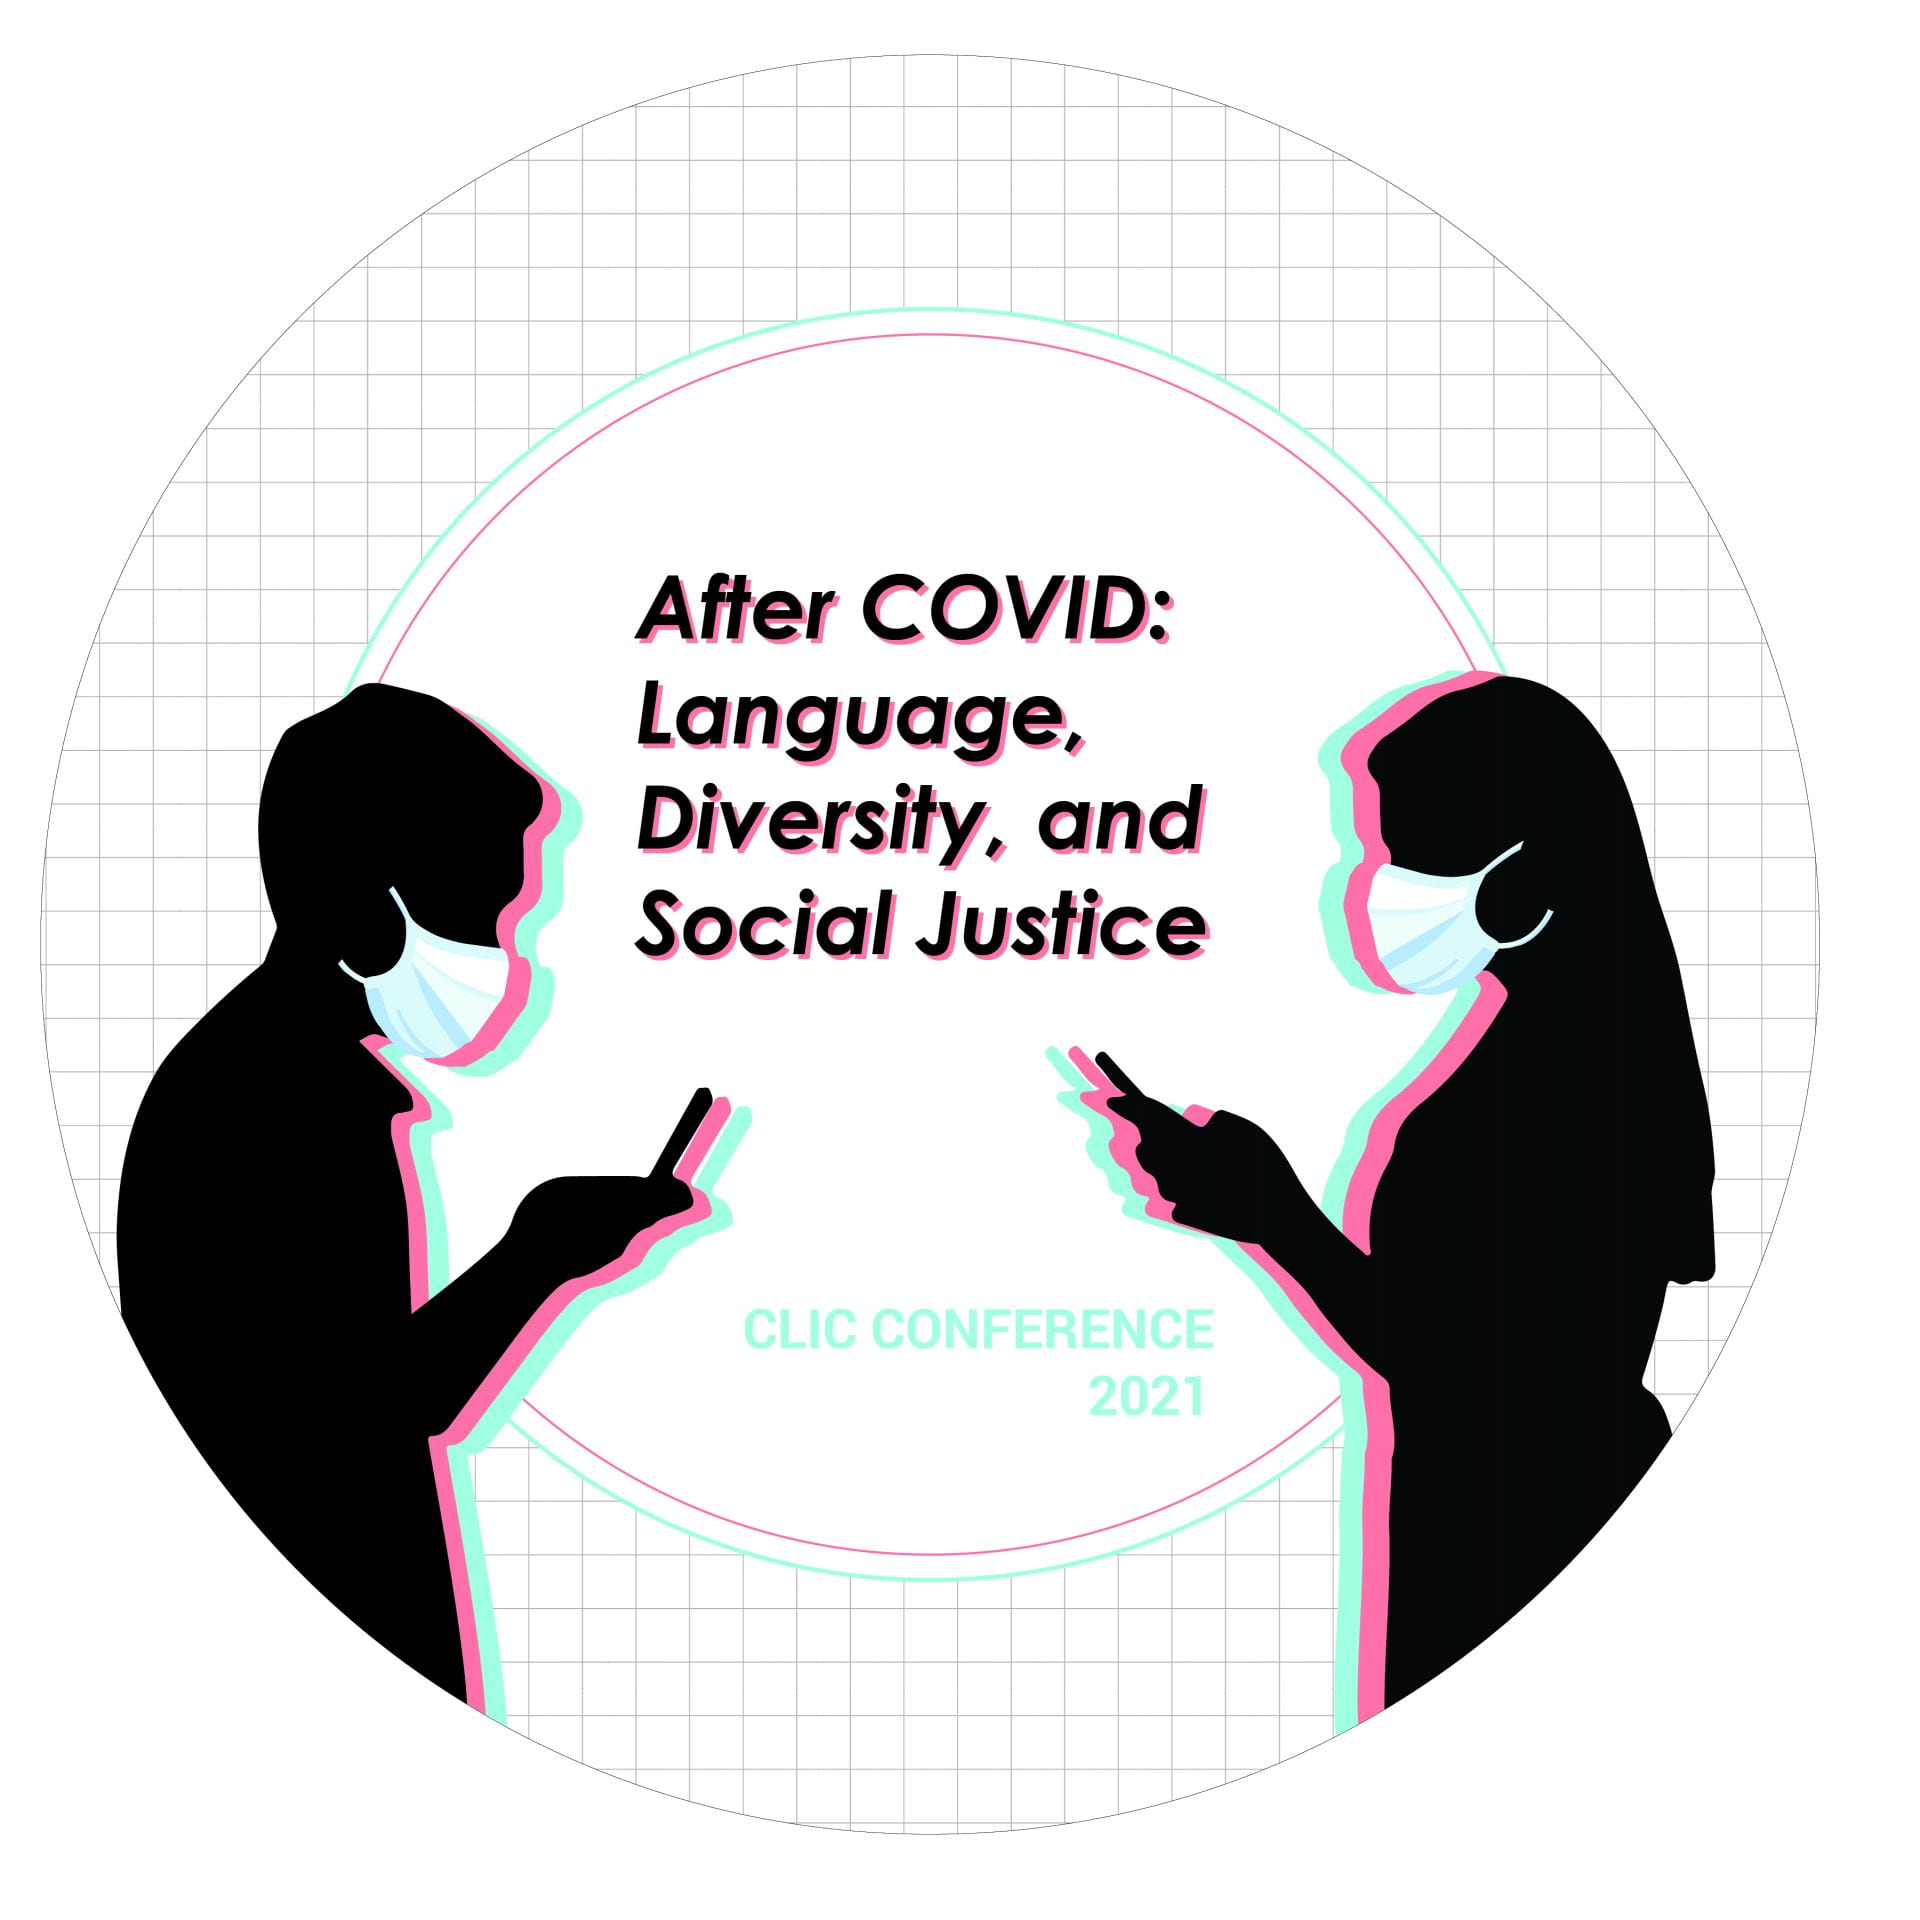 After COVID: Language, Diversity, and Social Justice